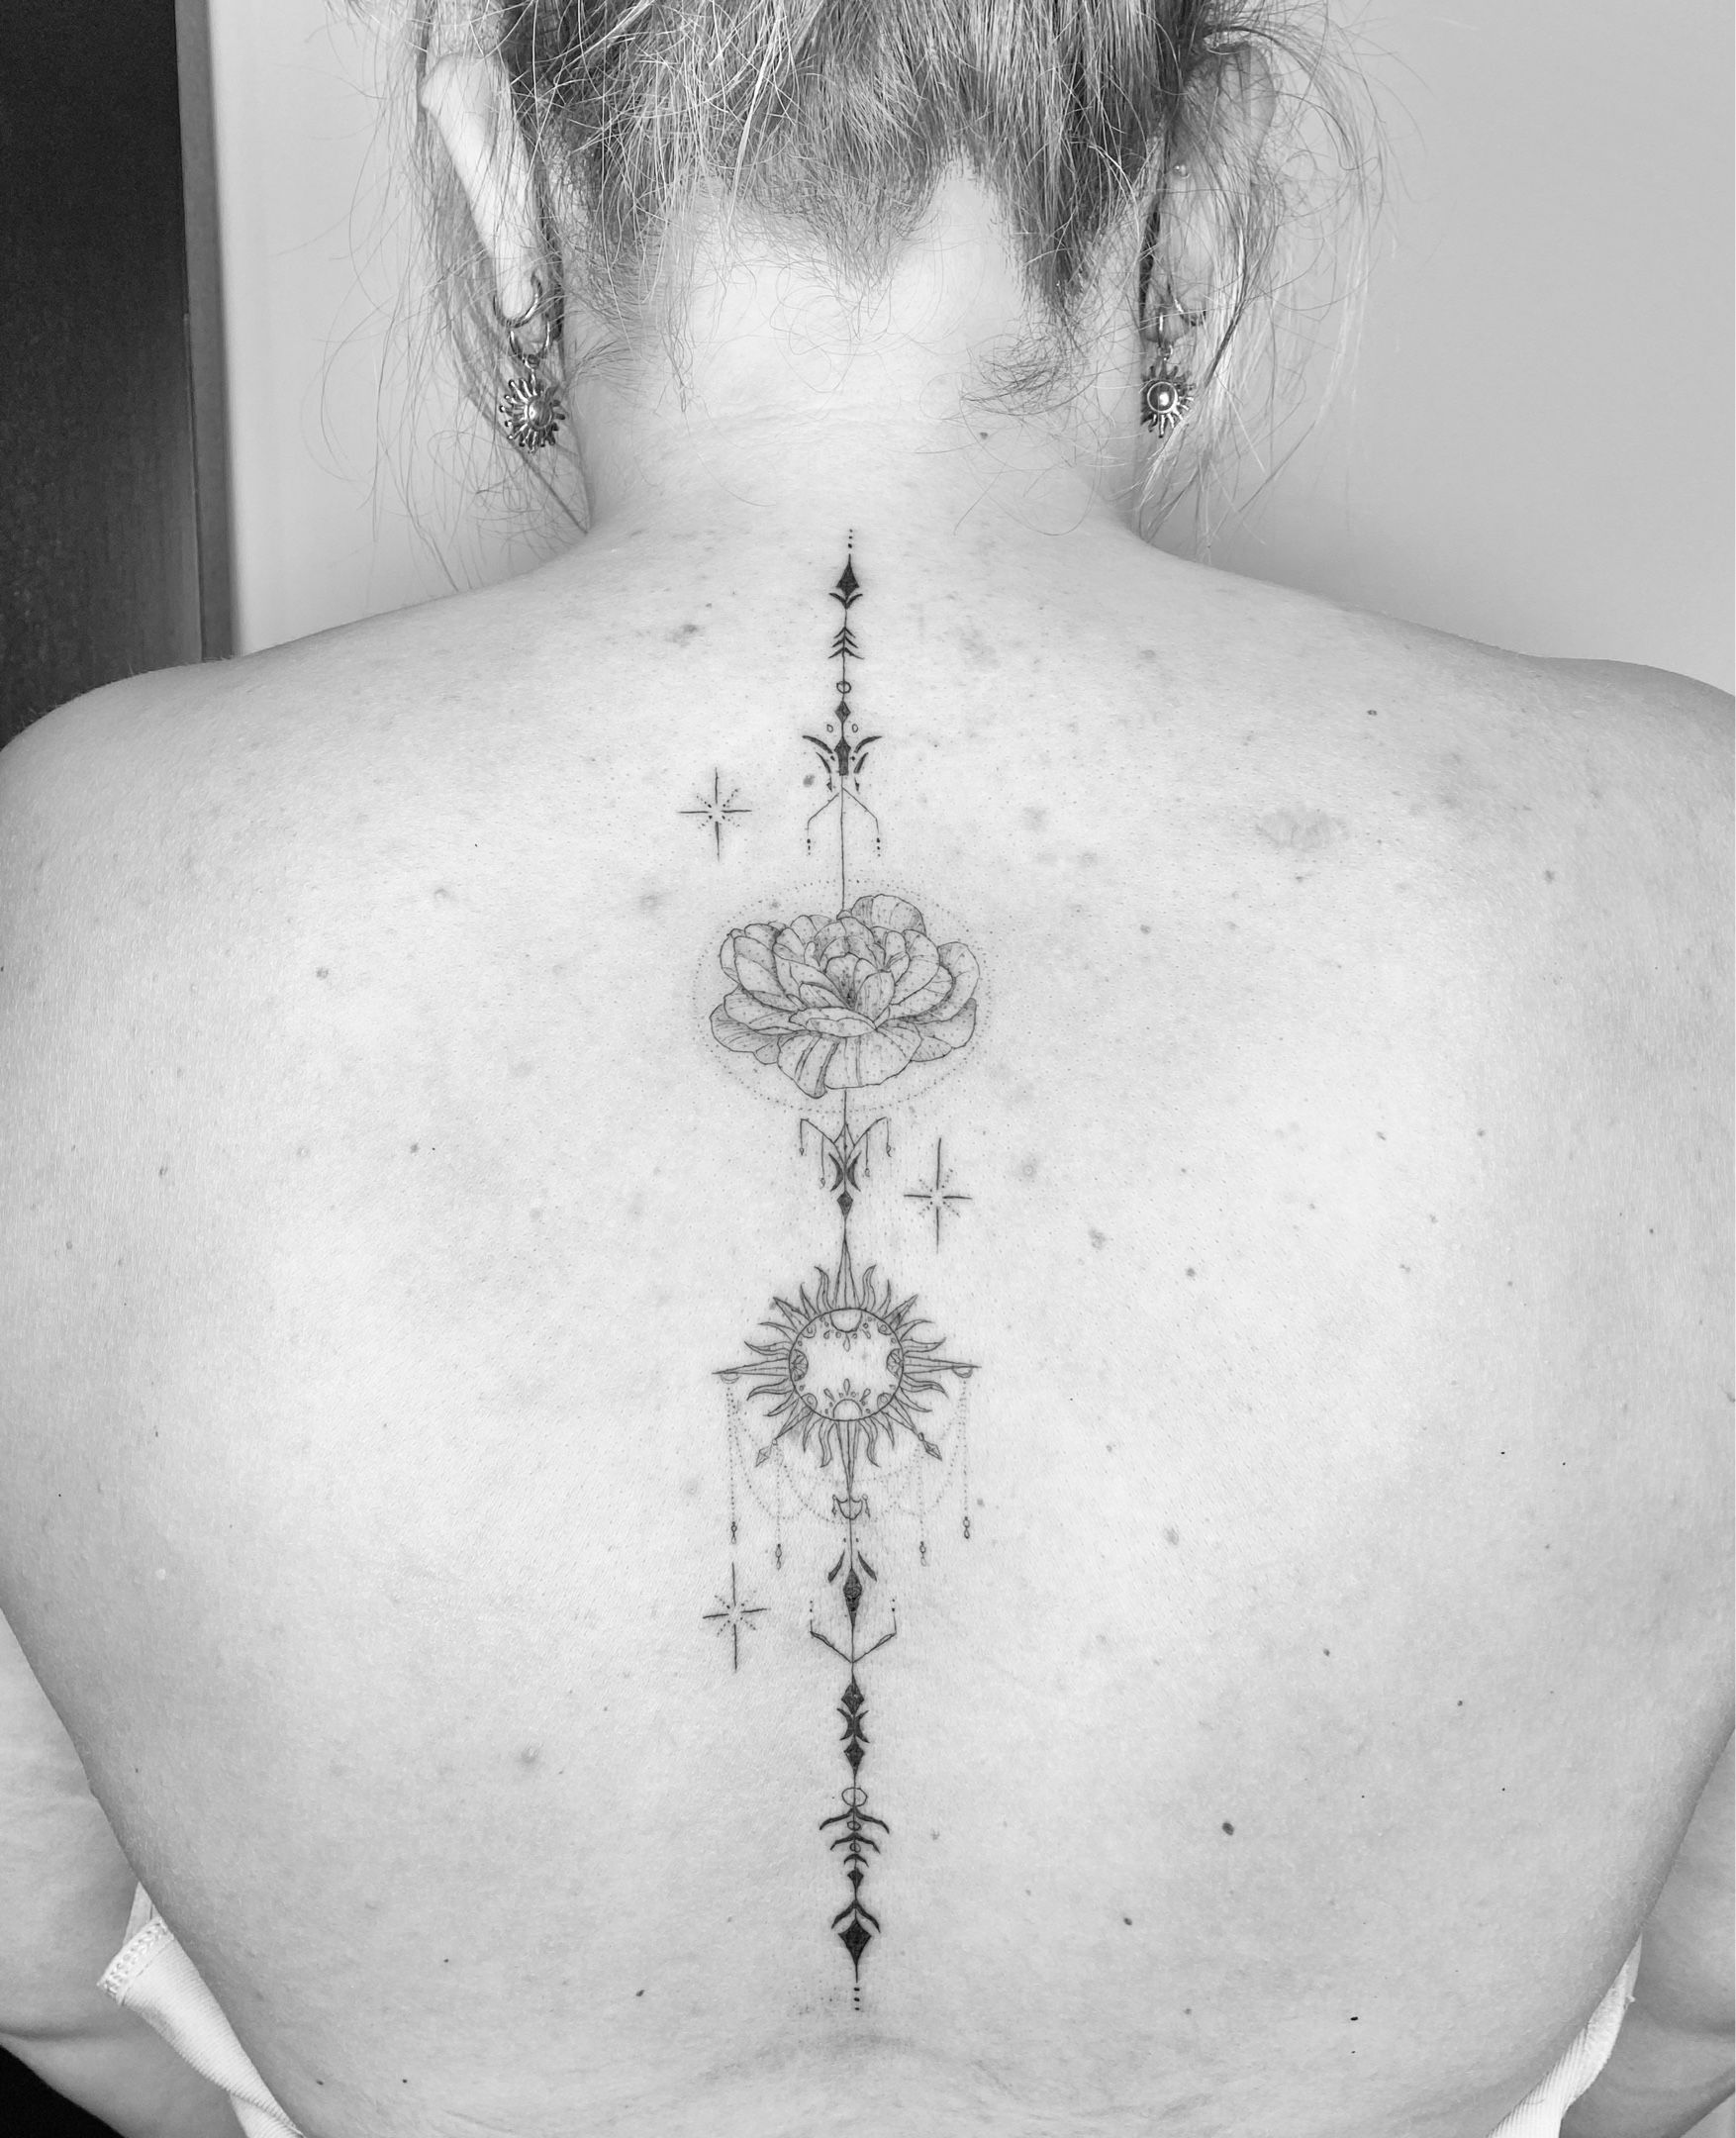 25 Phases Of The Moon Tattoos on Spine